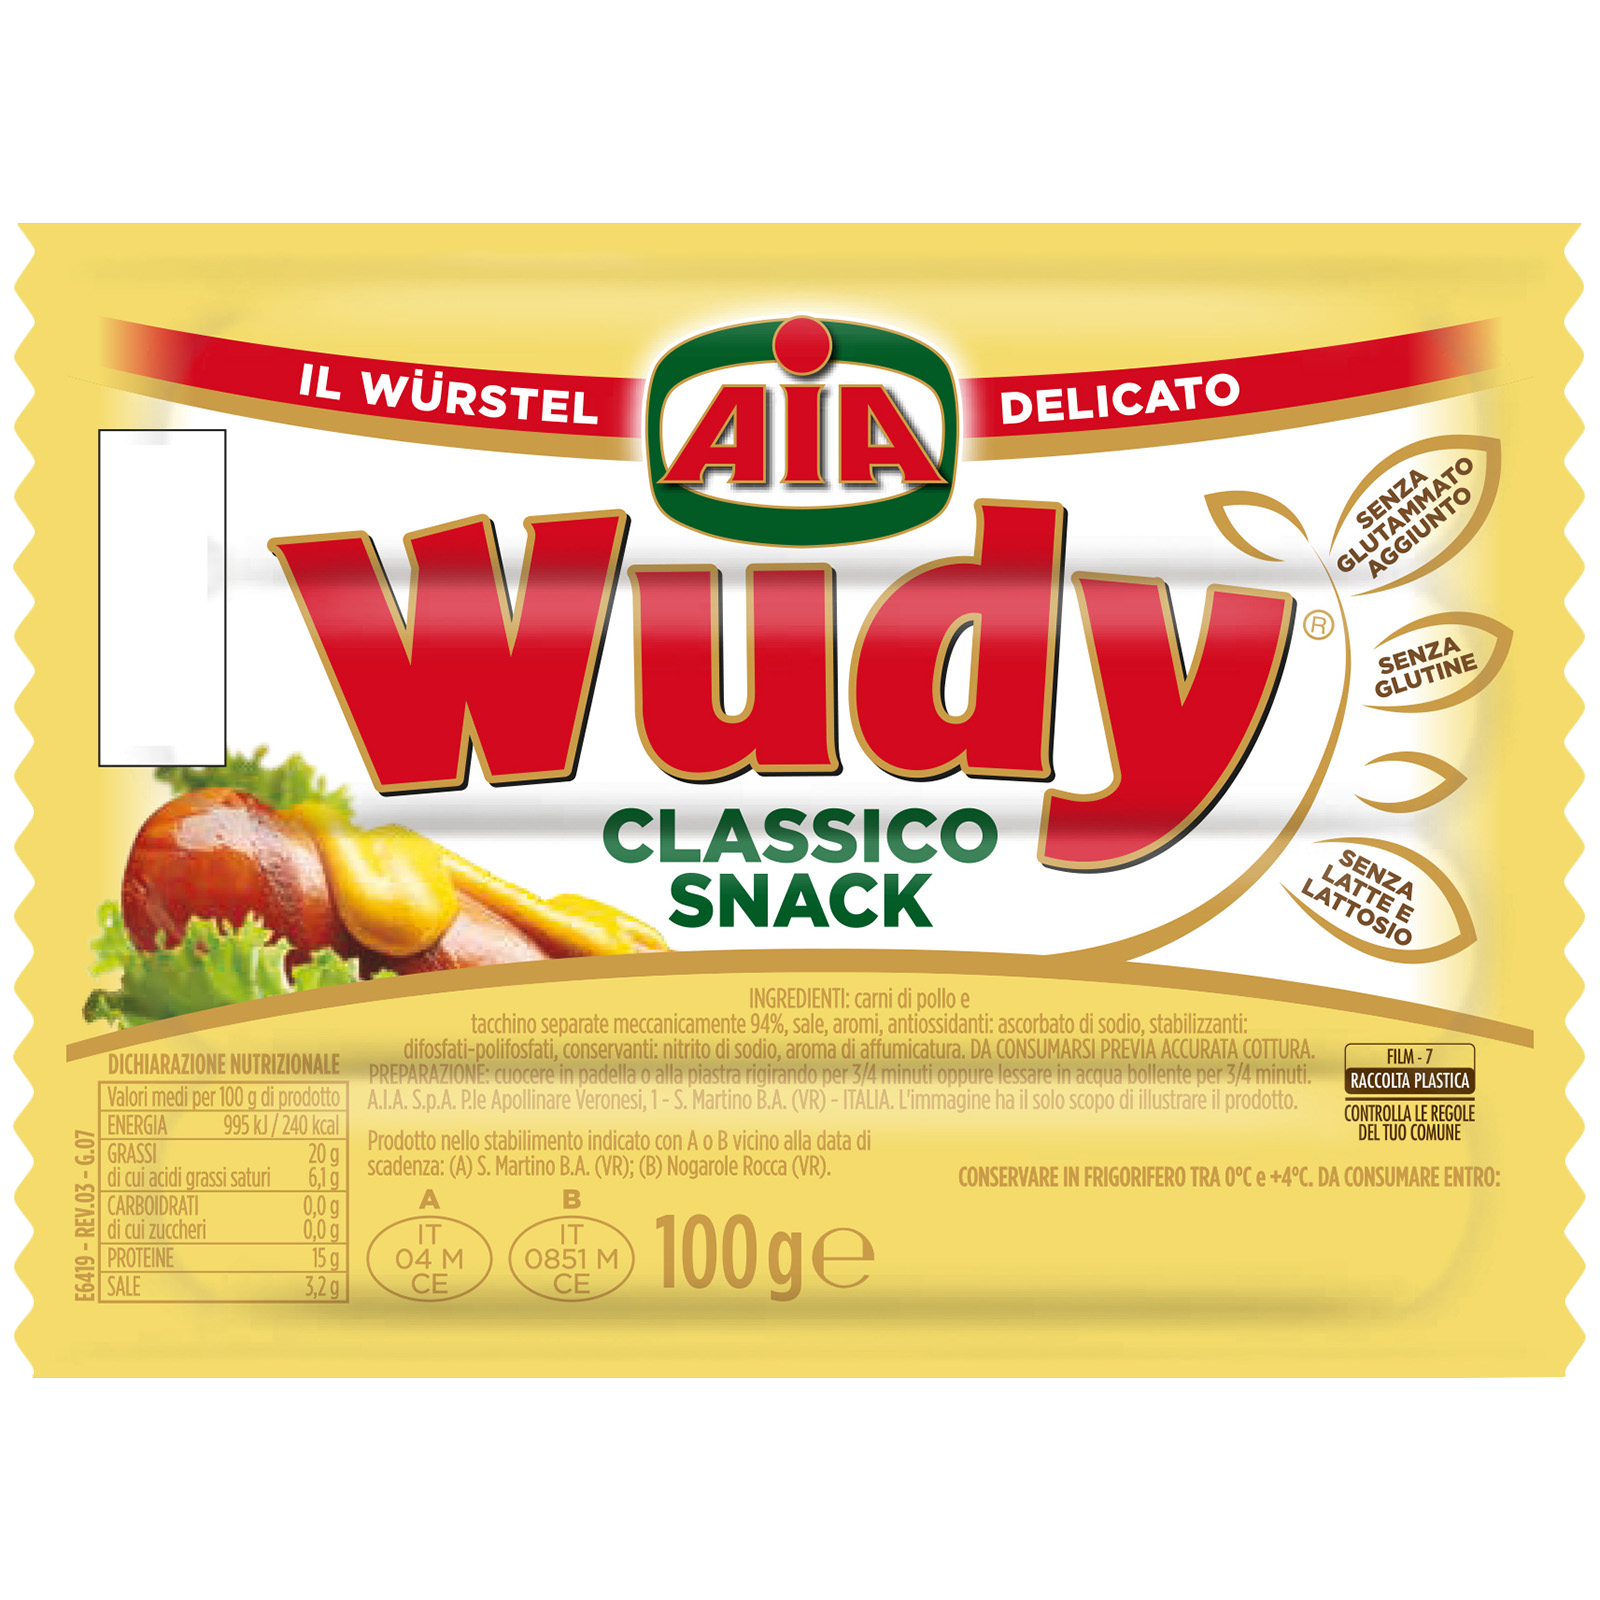 Wudy Cocktail Classico 350g